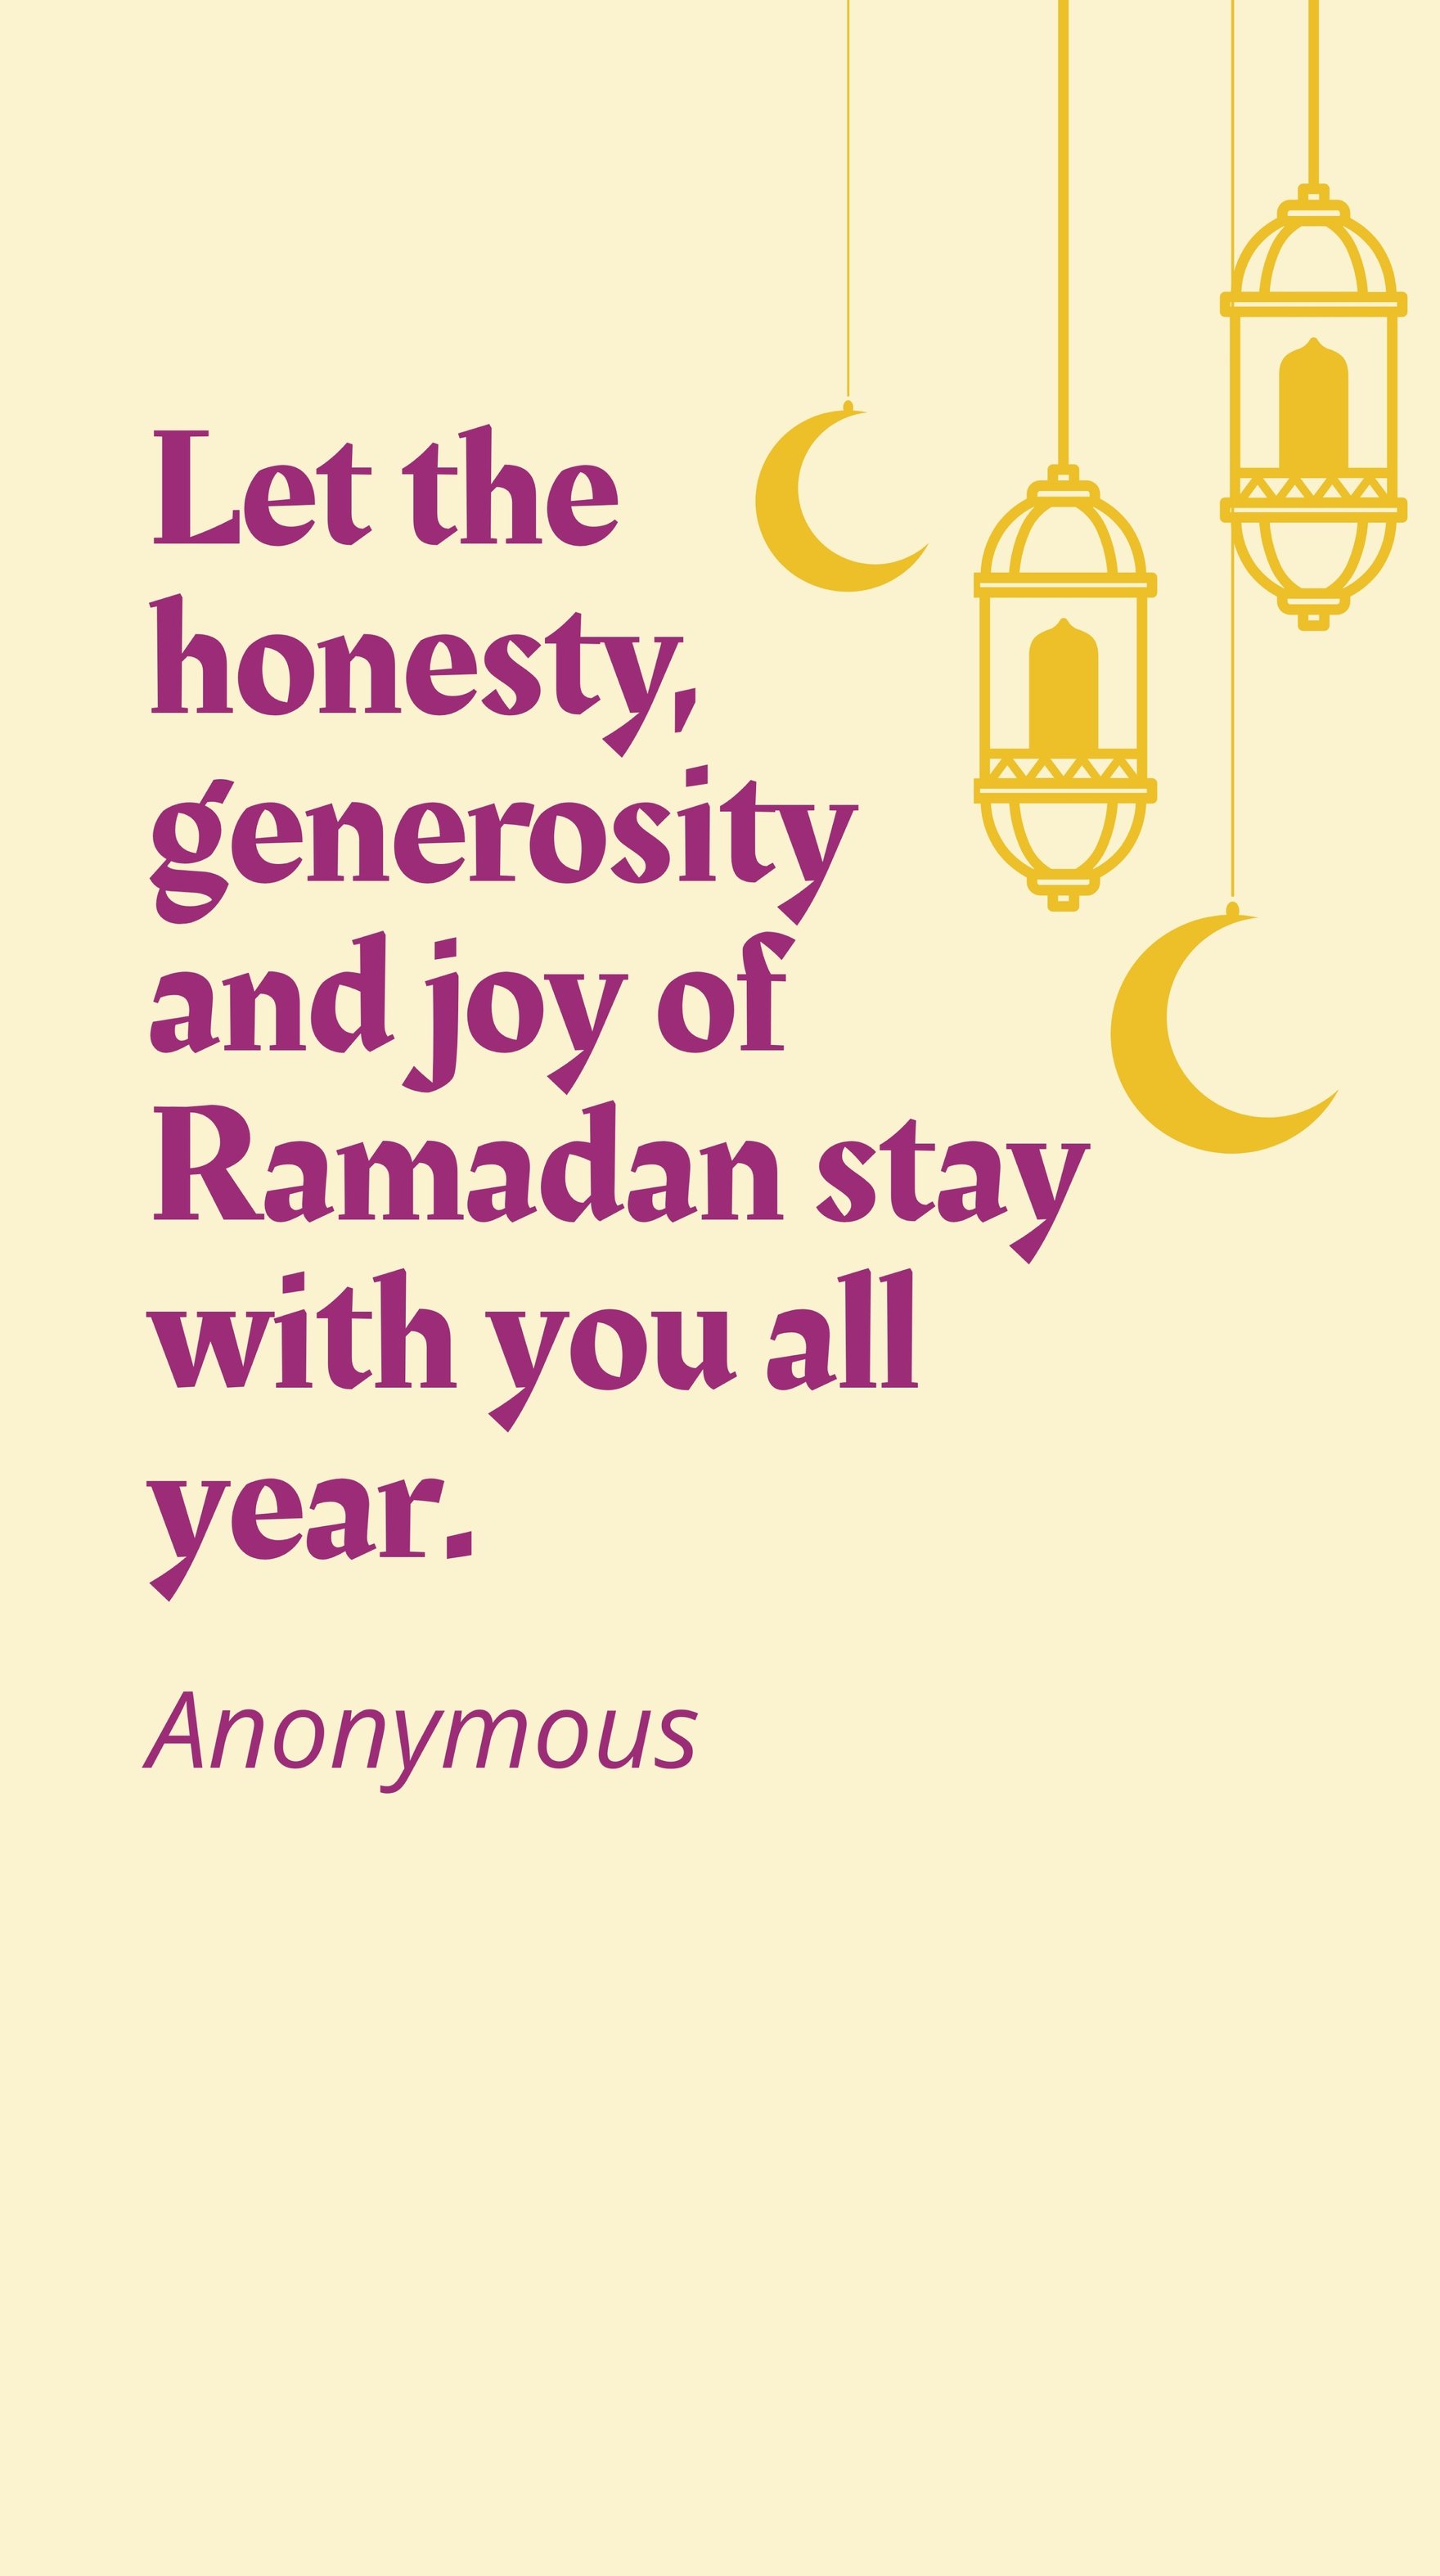 Free Anonymous - Let the honesty, generosity and joy of Ramadan stay with you all year. in JPG